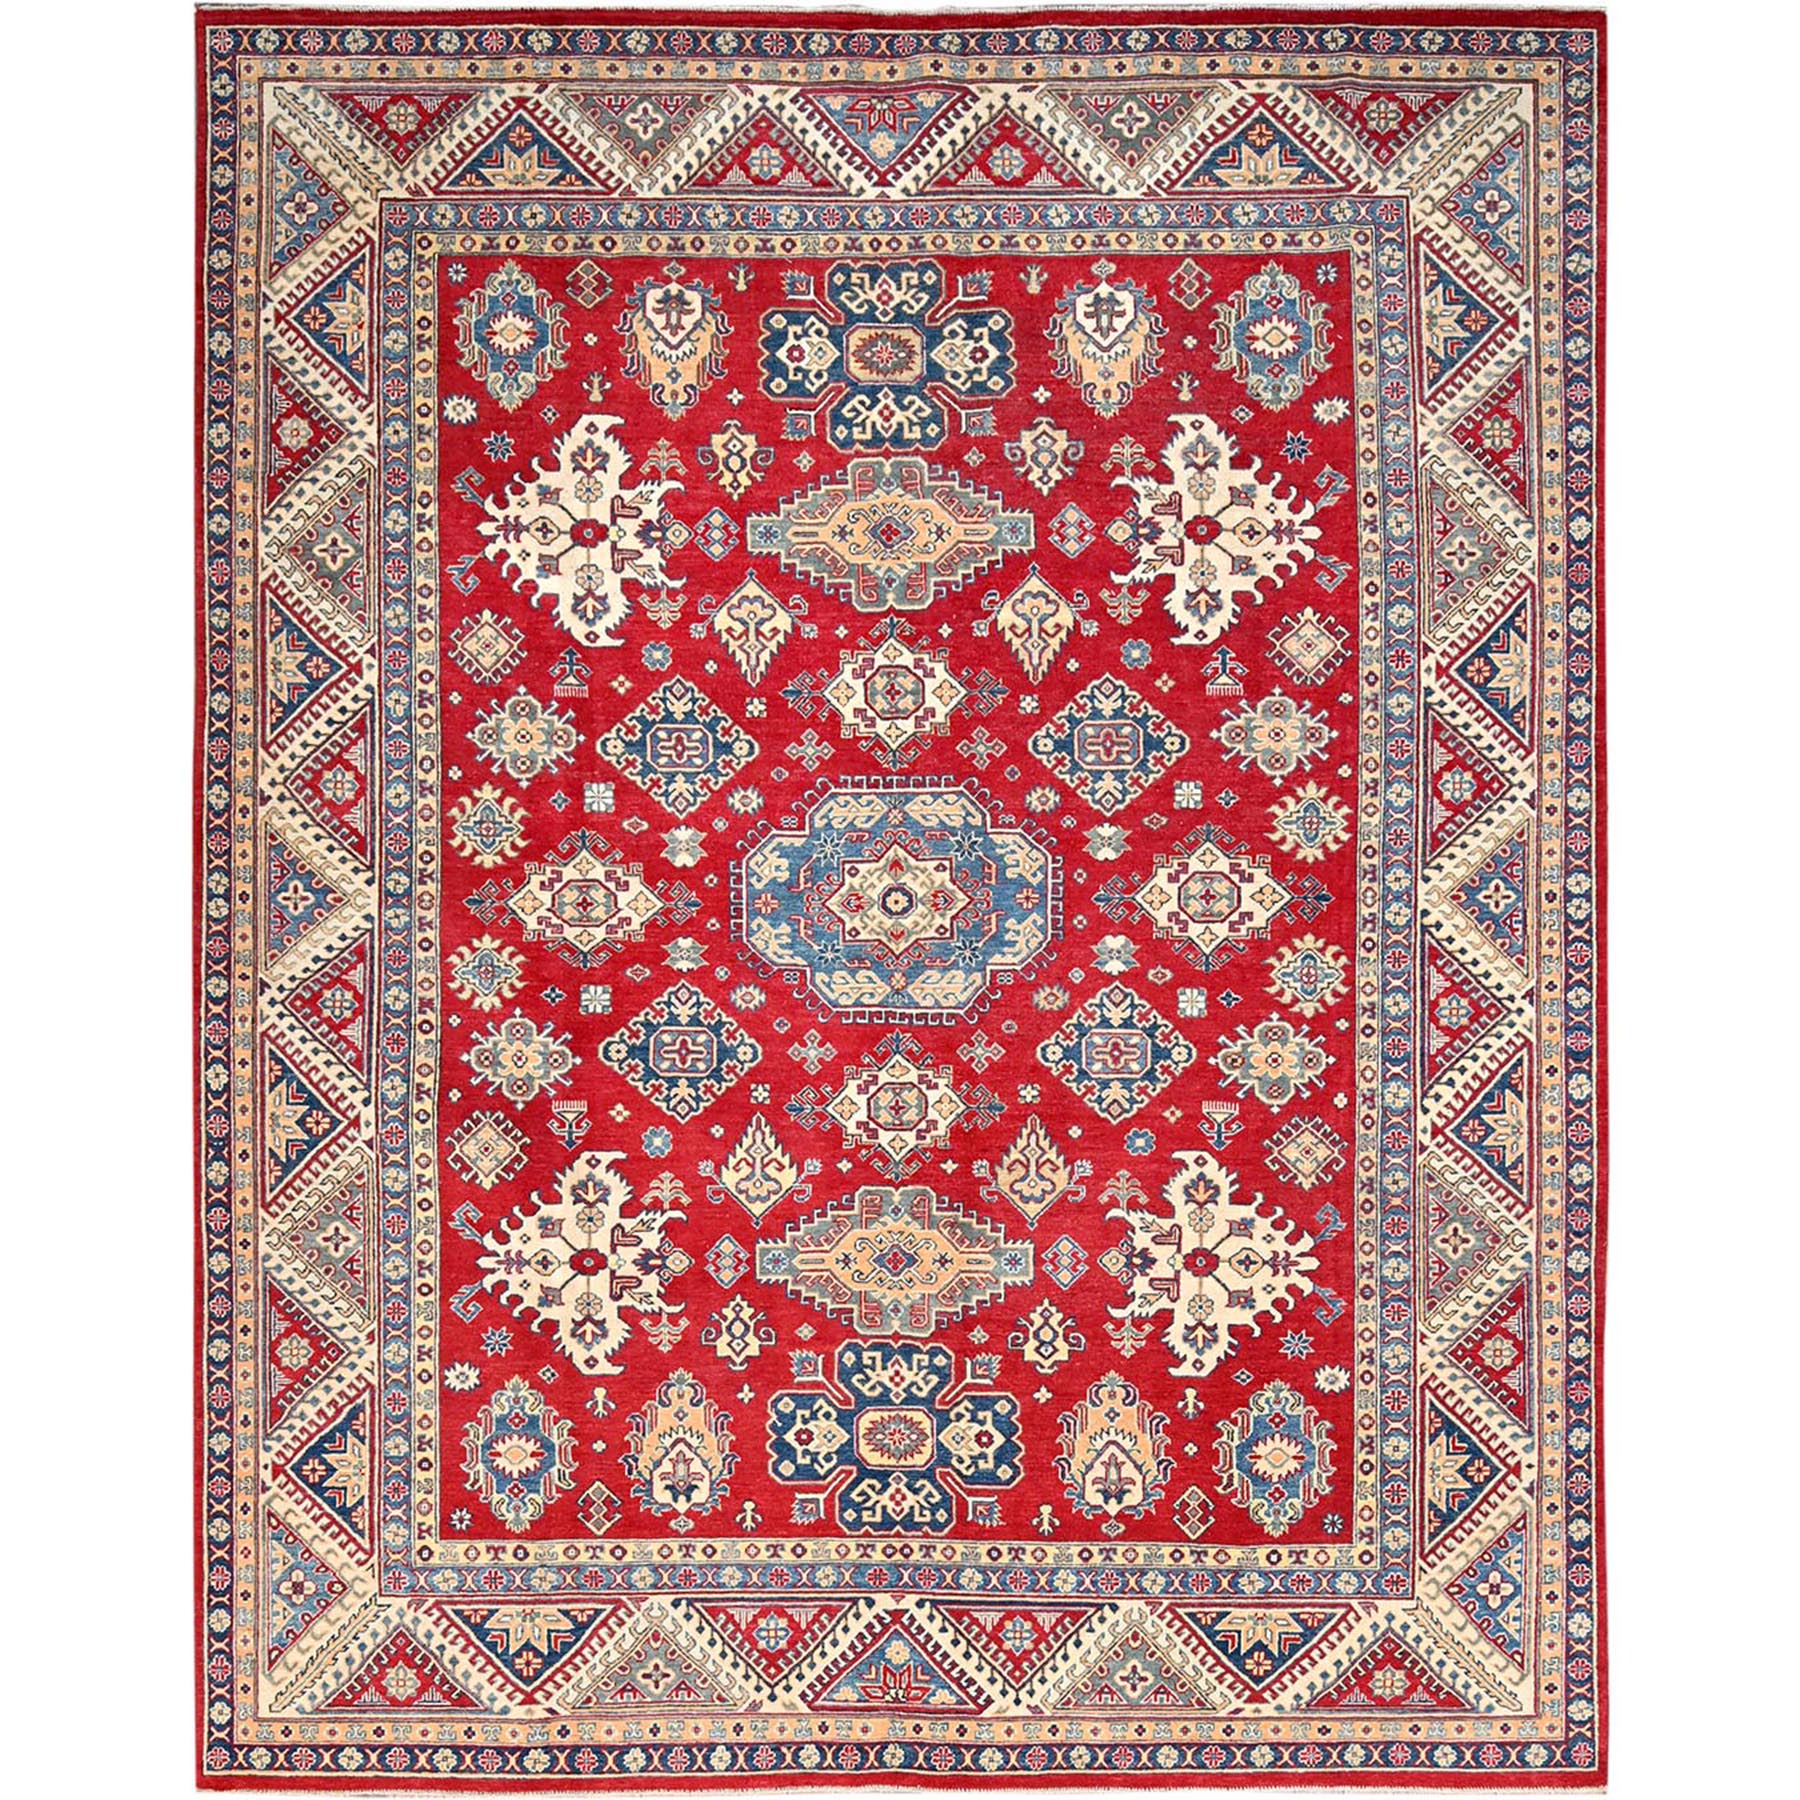 Valiant Poppy Red With Opulence White, Extra Soft Wool, Hand Knotted, Natural Dyes, Denser Weave Kazak with All Over Tribal Motifs, Oriental Rug 